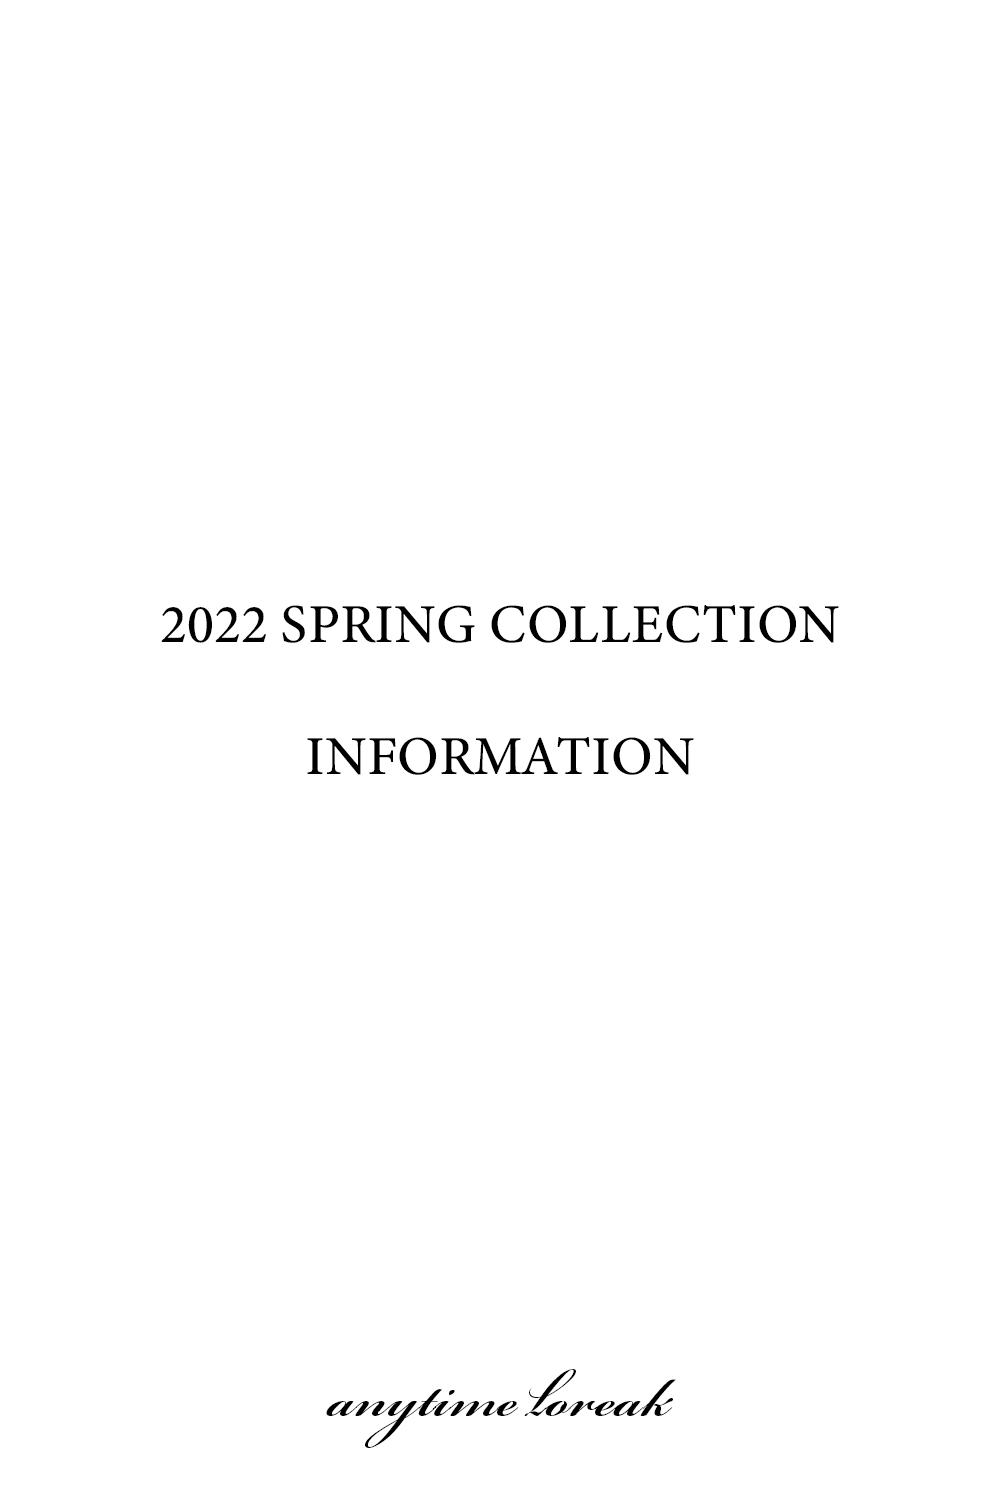 2022 S/S COLLECTION INFORMATION